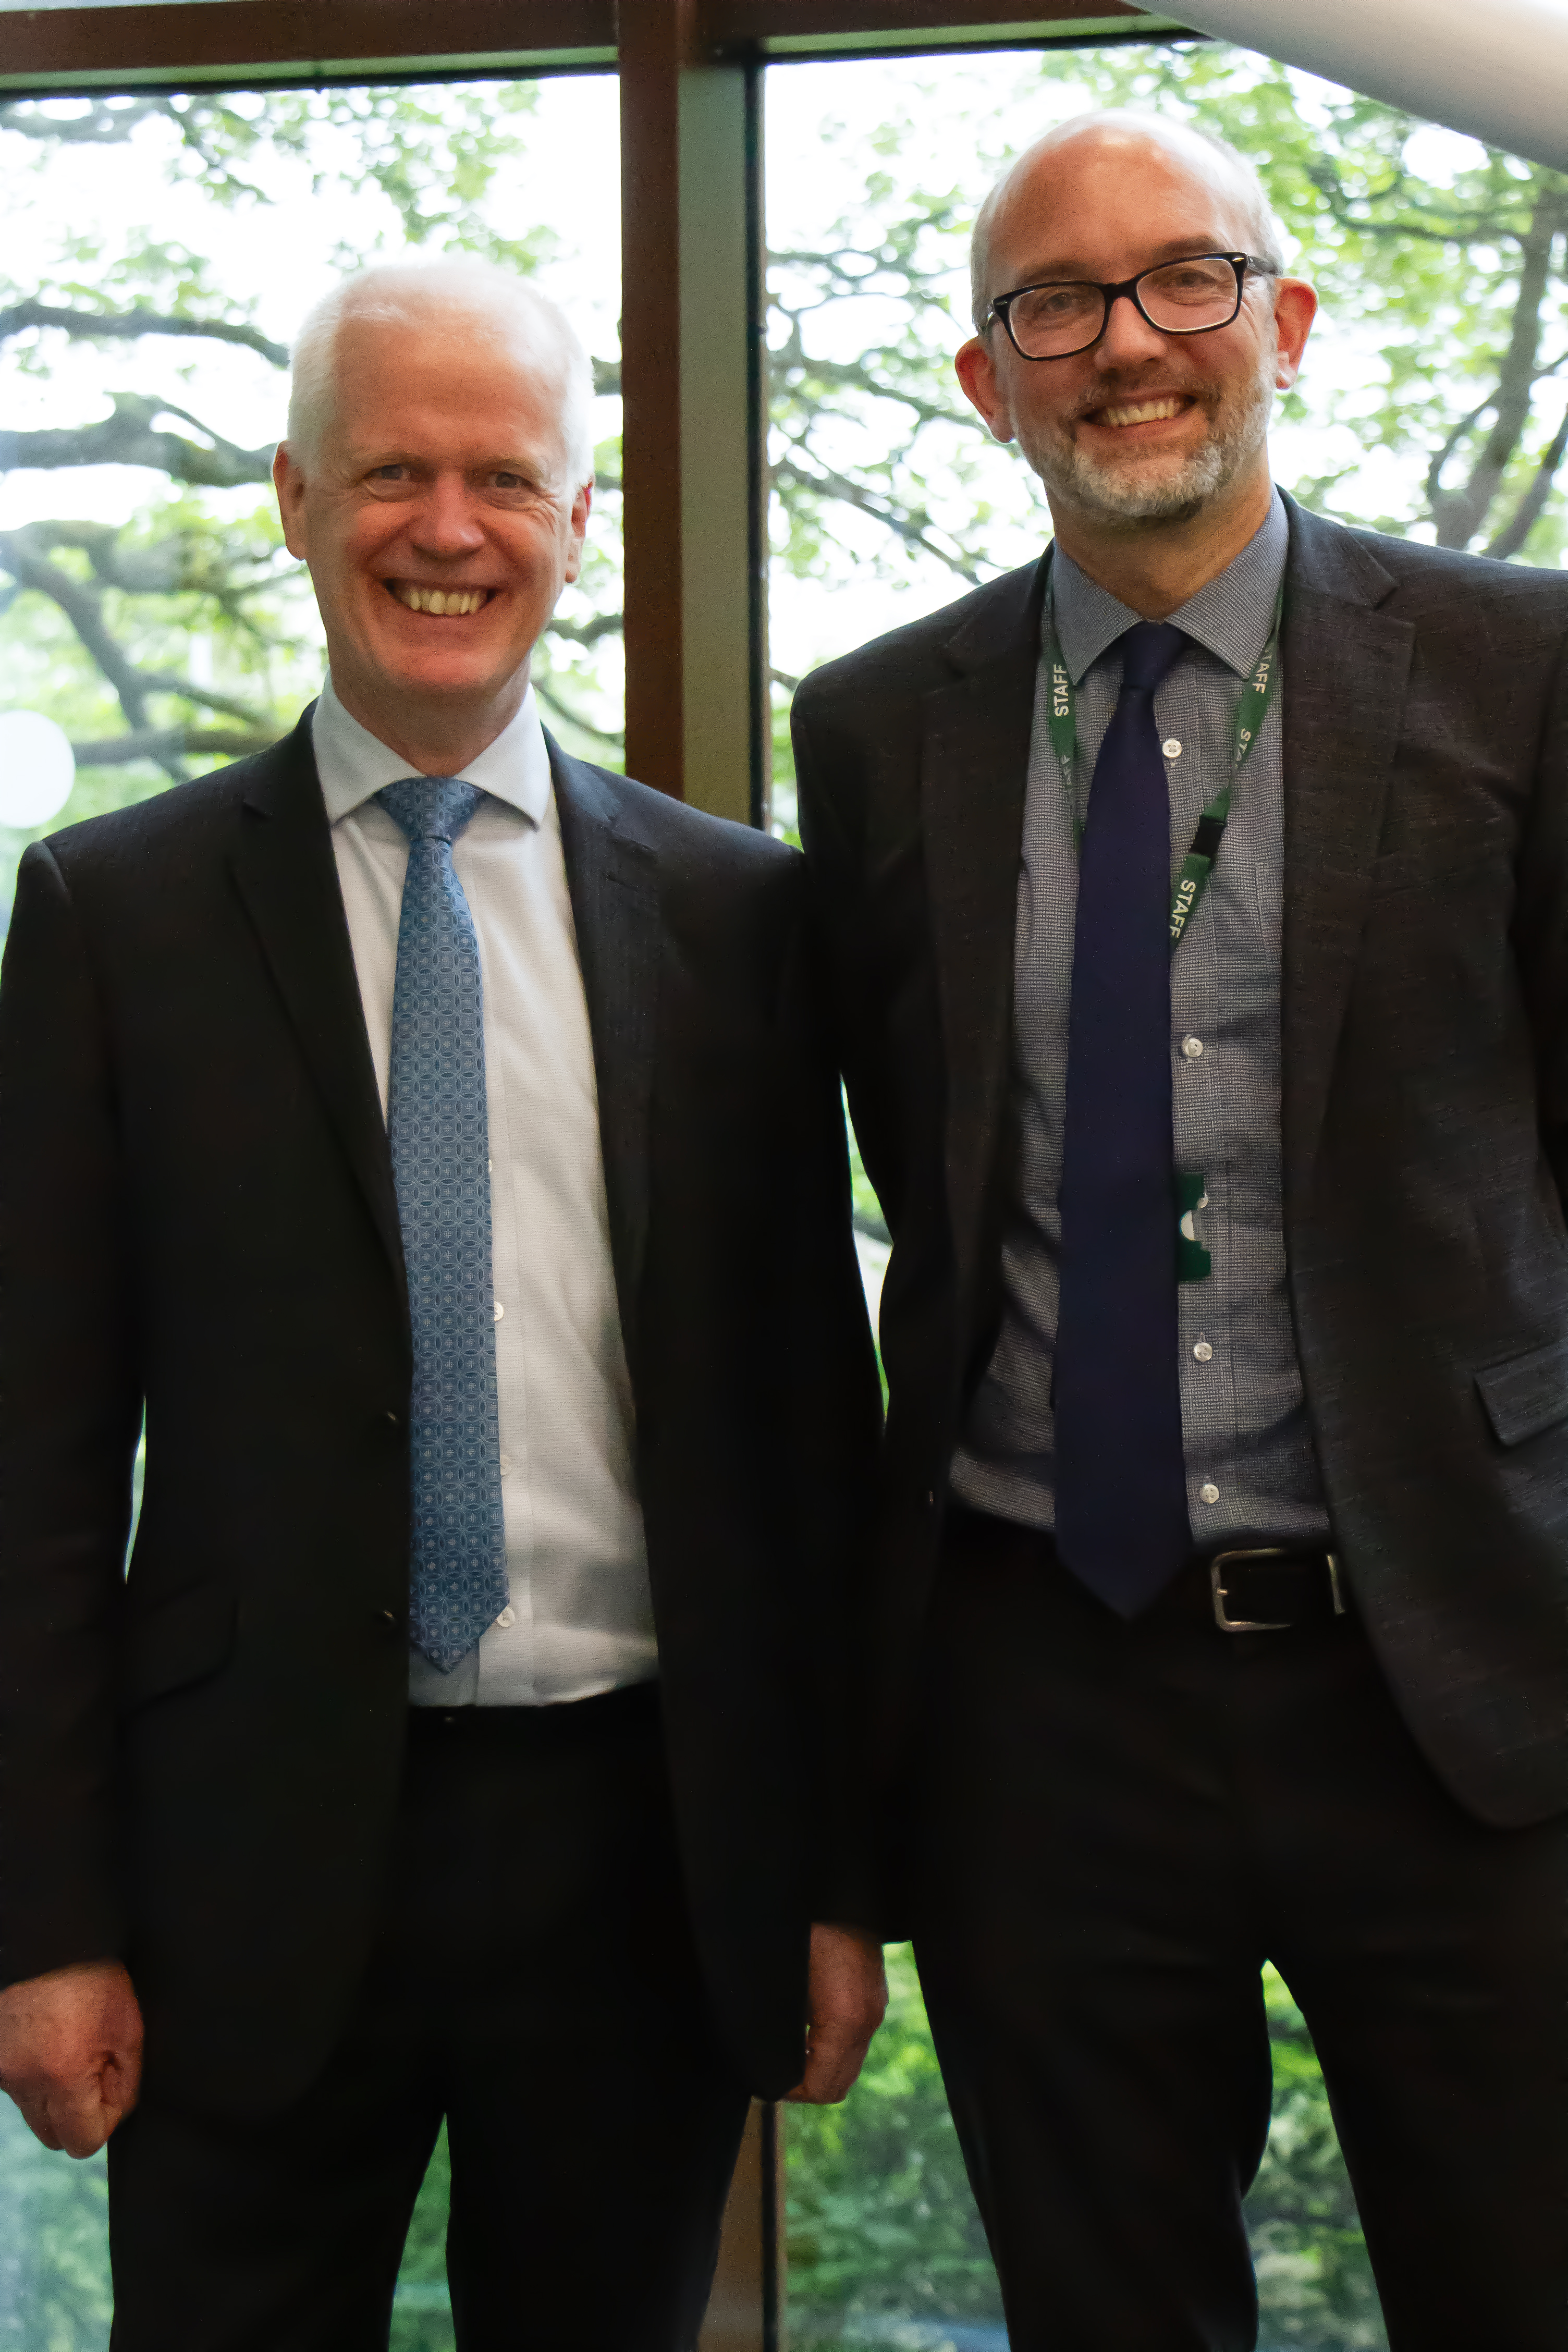 Current Fallibroome Academy Headteacher Francis Power with his newly-appointed successor Ross Martland